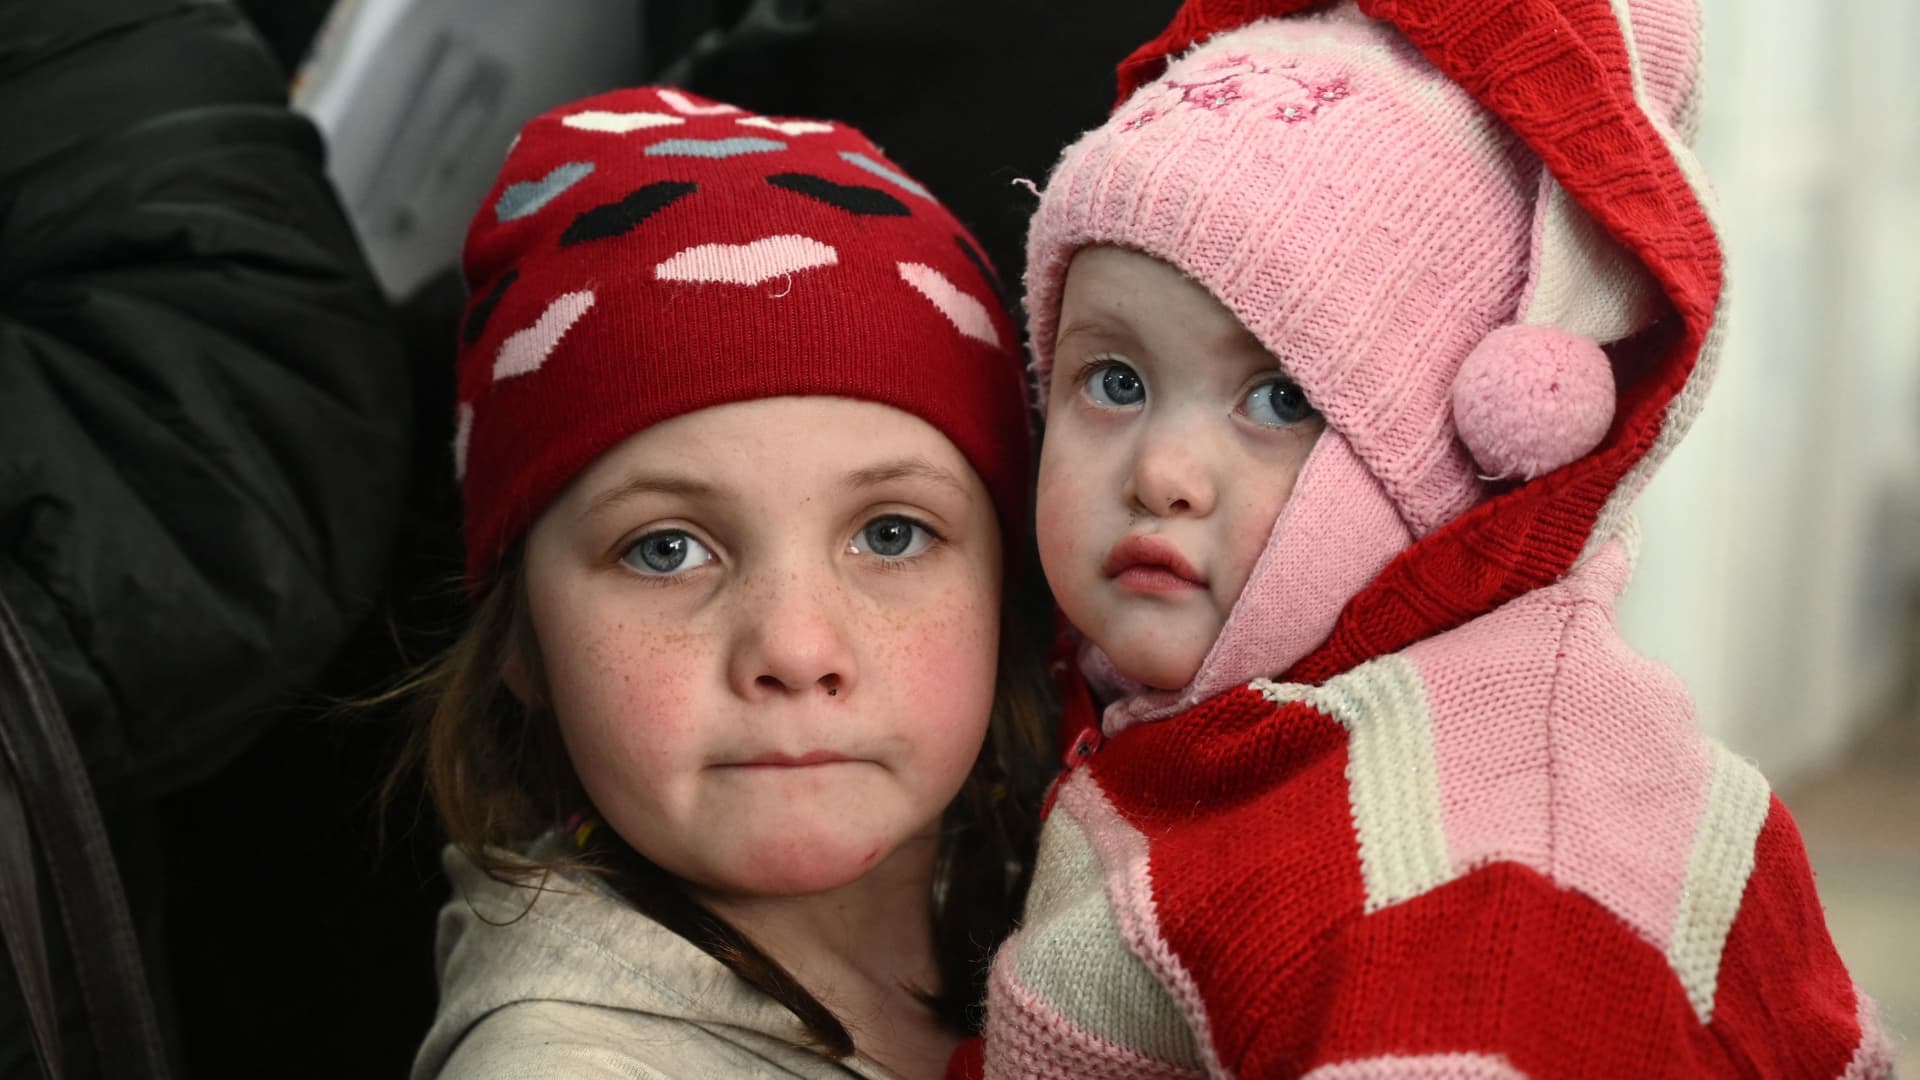 Children stay at a temporary accommodation centre for evacuees, including residents of the Ukrainian city of Mariupol, in the building of a local sports school in Taganrog in the Rostov region, Russia March 17, 2022.